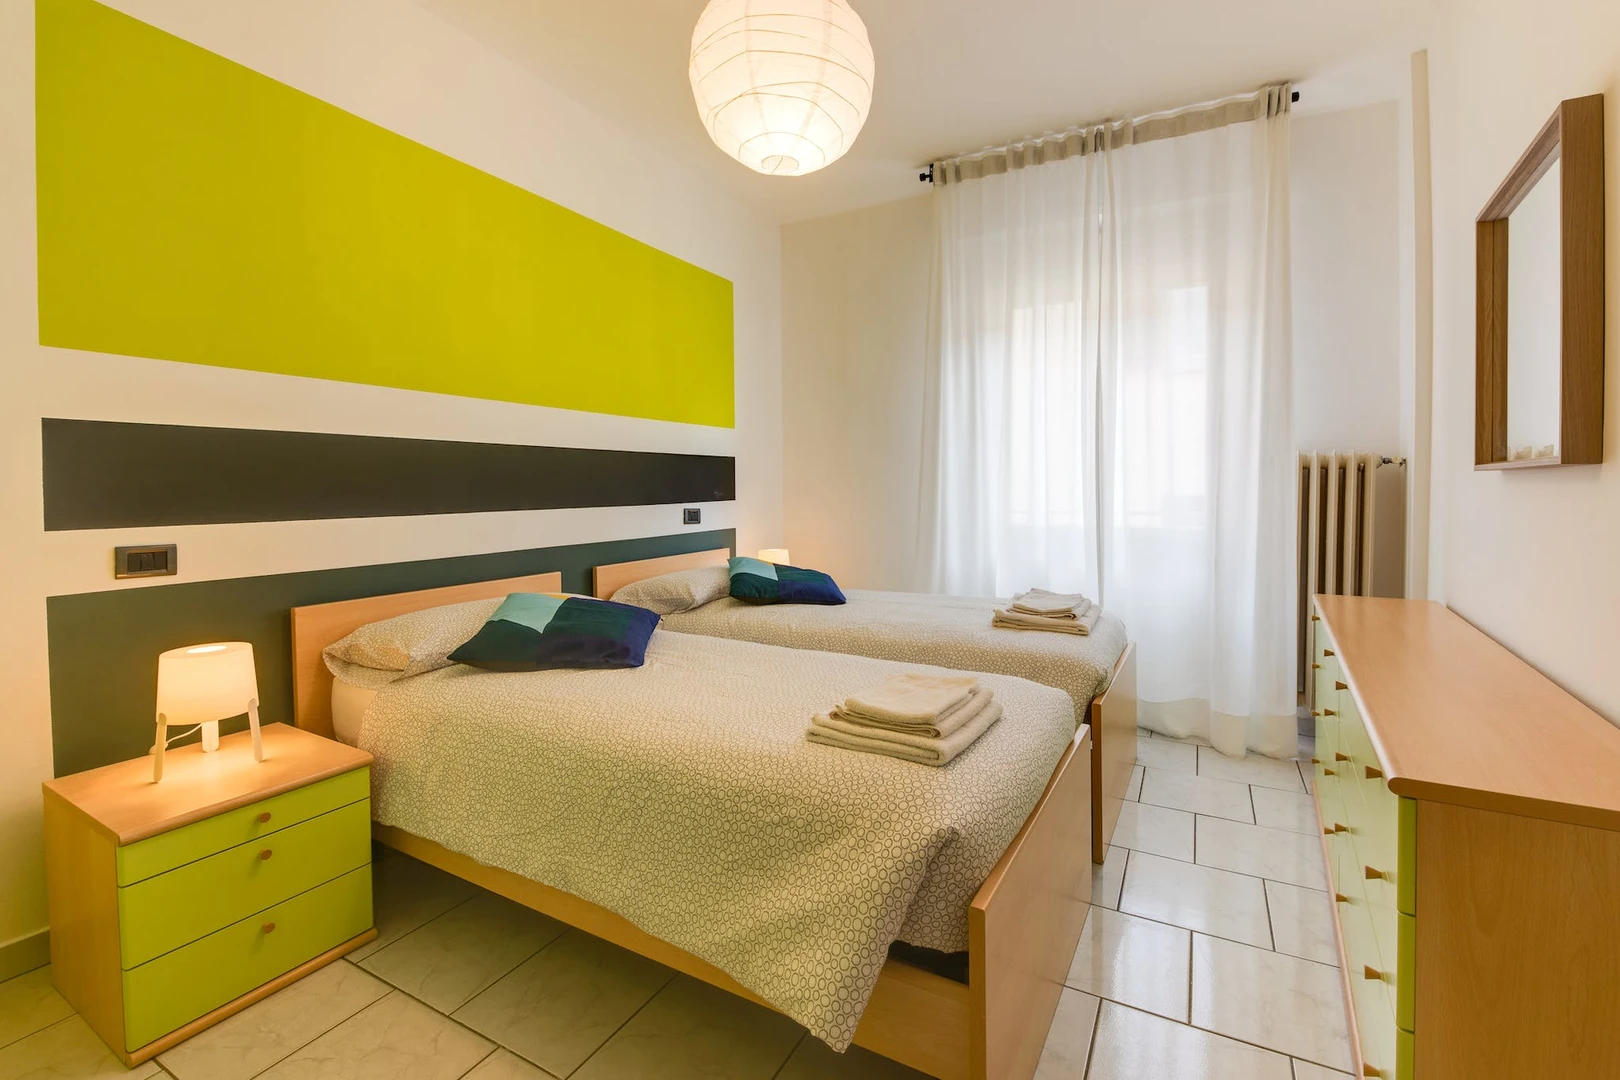 Accommodation in the centre of Forlì